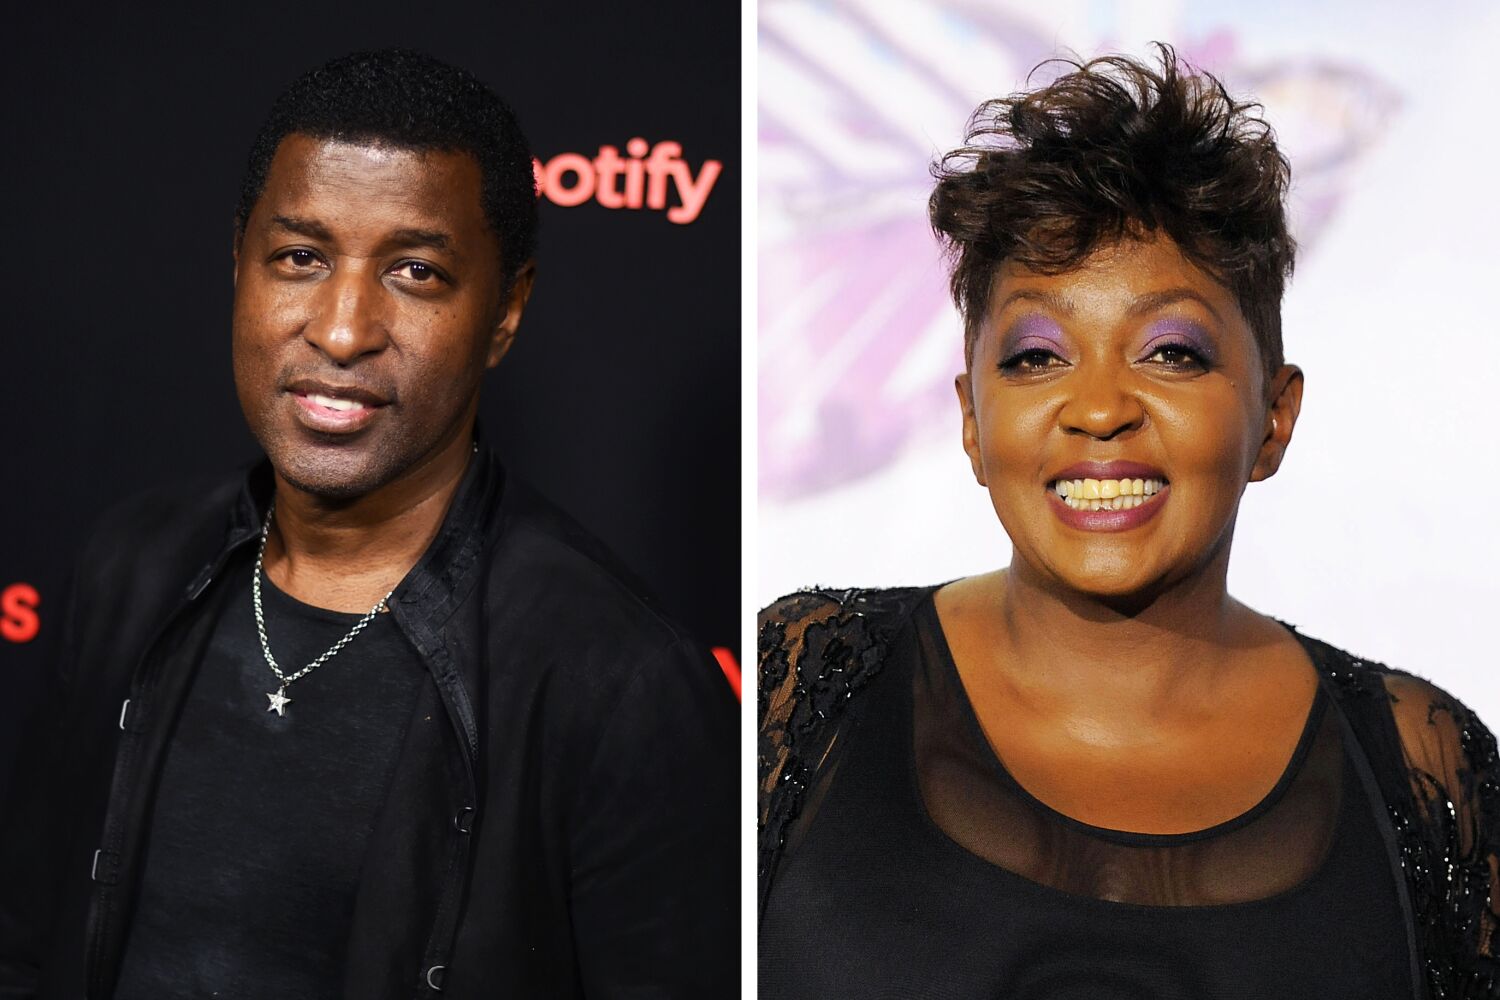 Anita Baker will resume Songstress tour alone after harassment from Babyface fans